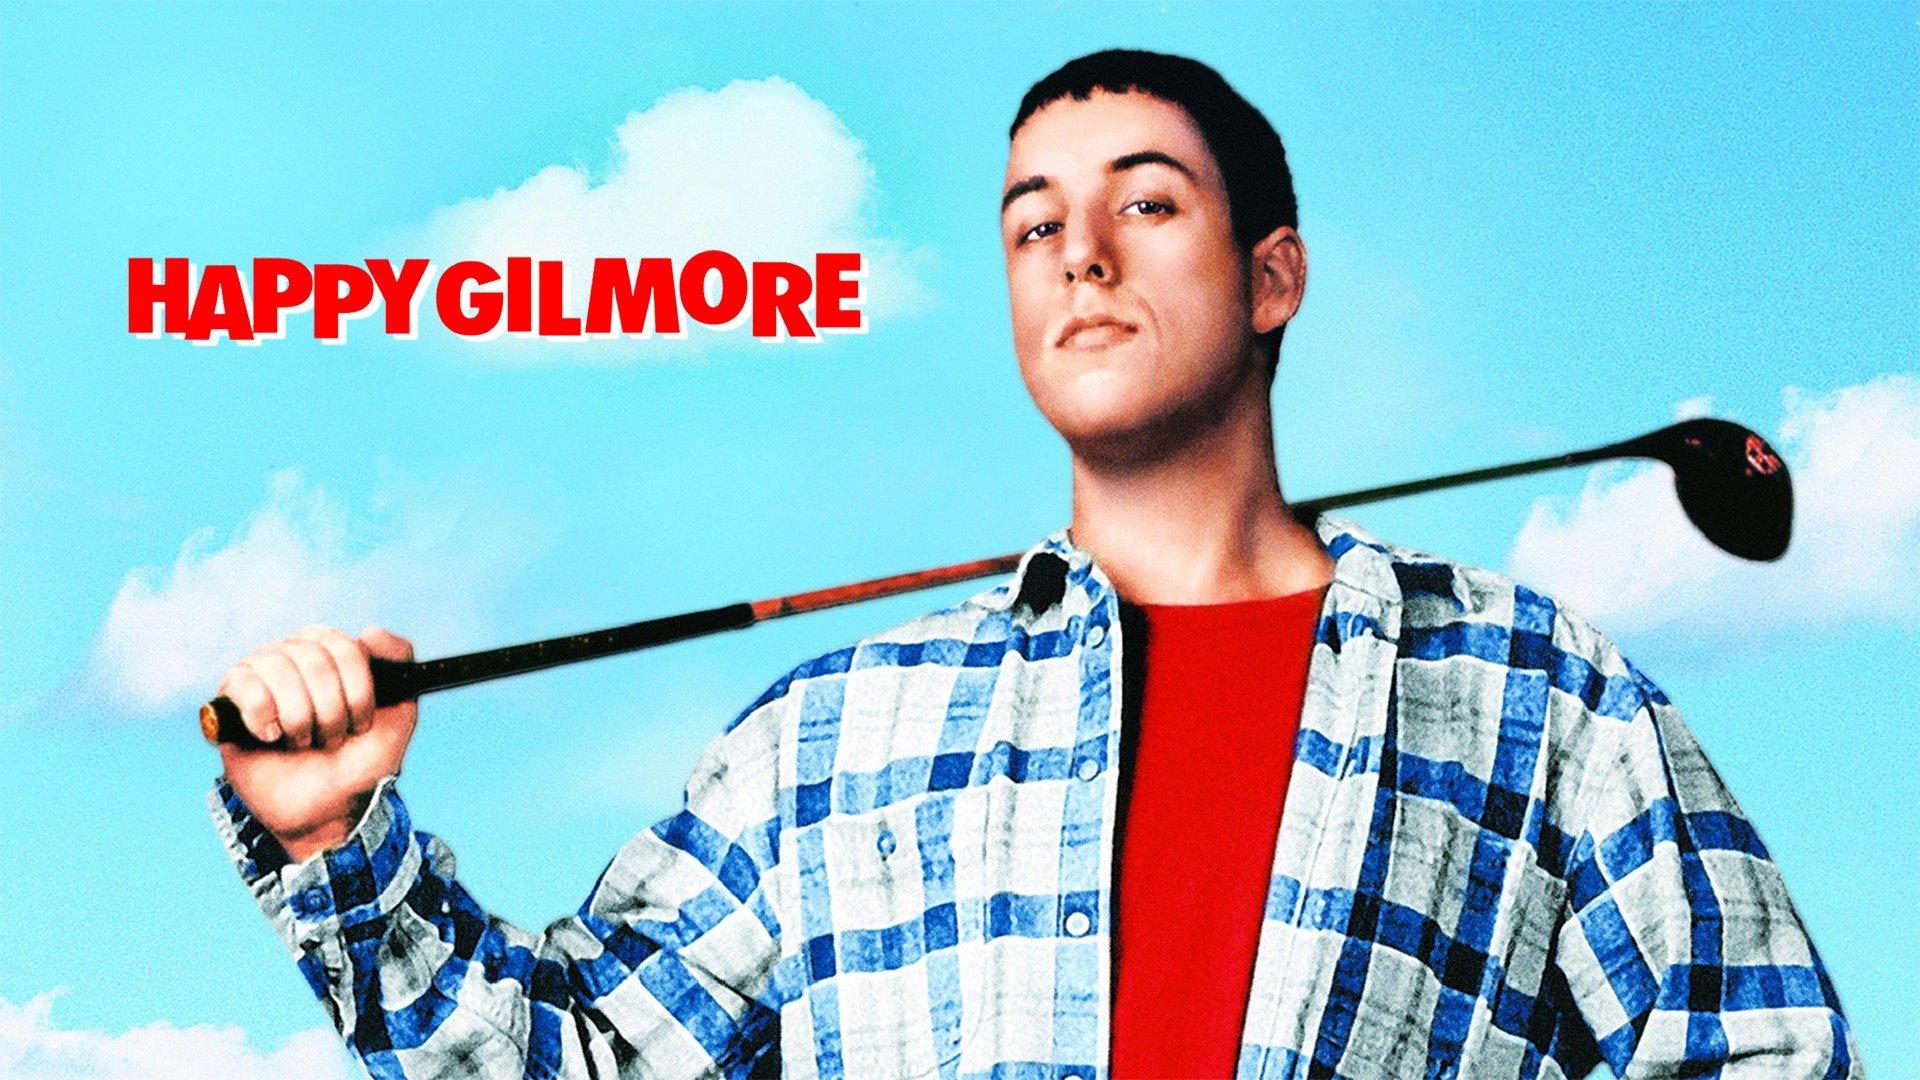 Watch Happy Gilmore Streaming Online on Philo (Free Trial)